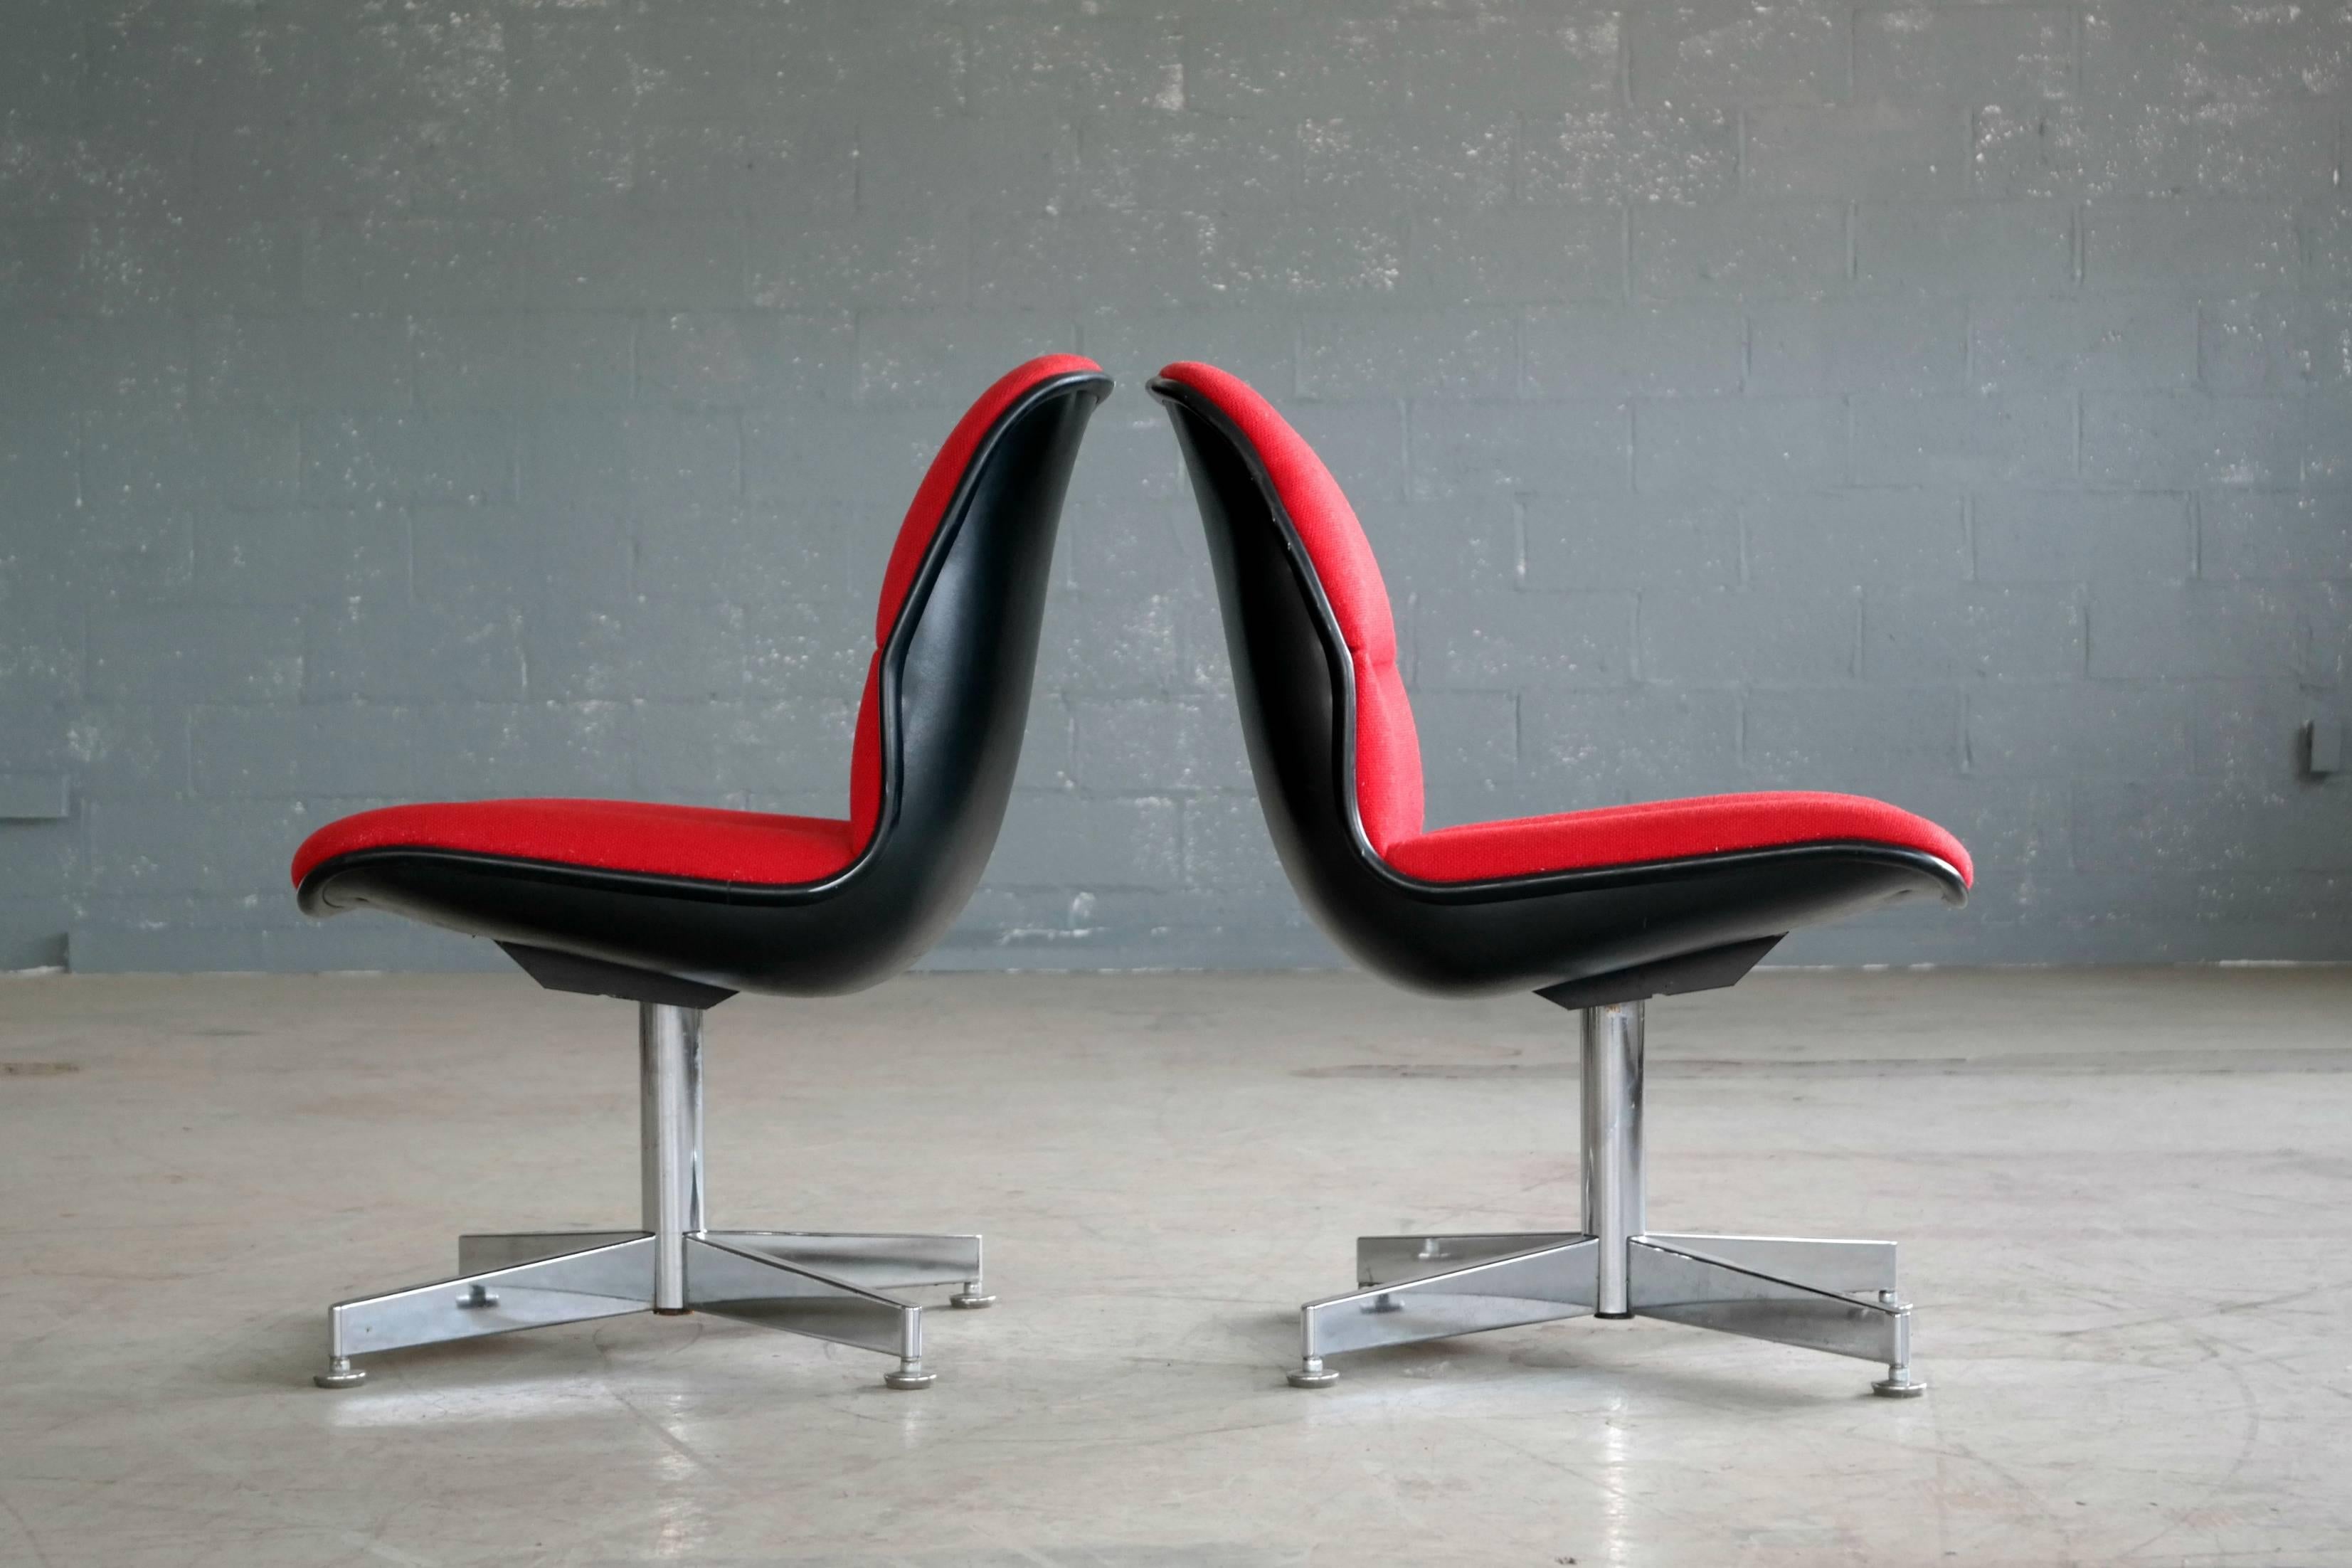 Pair of Conference Chairs in Steel and Red Wool by Chrome Craft In Good Condition For Sale In Bridgeport, CT